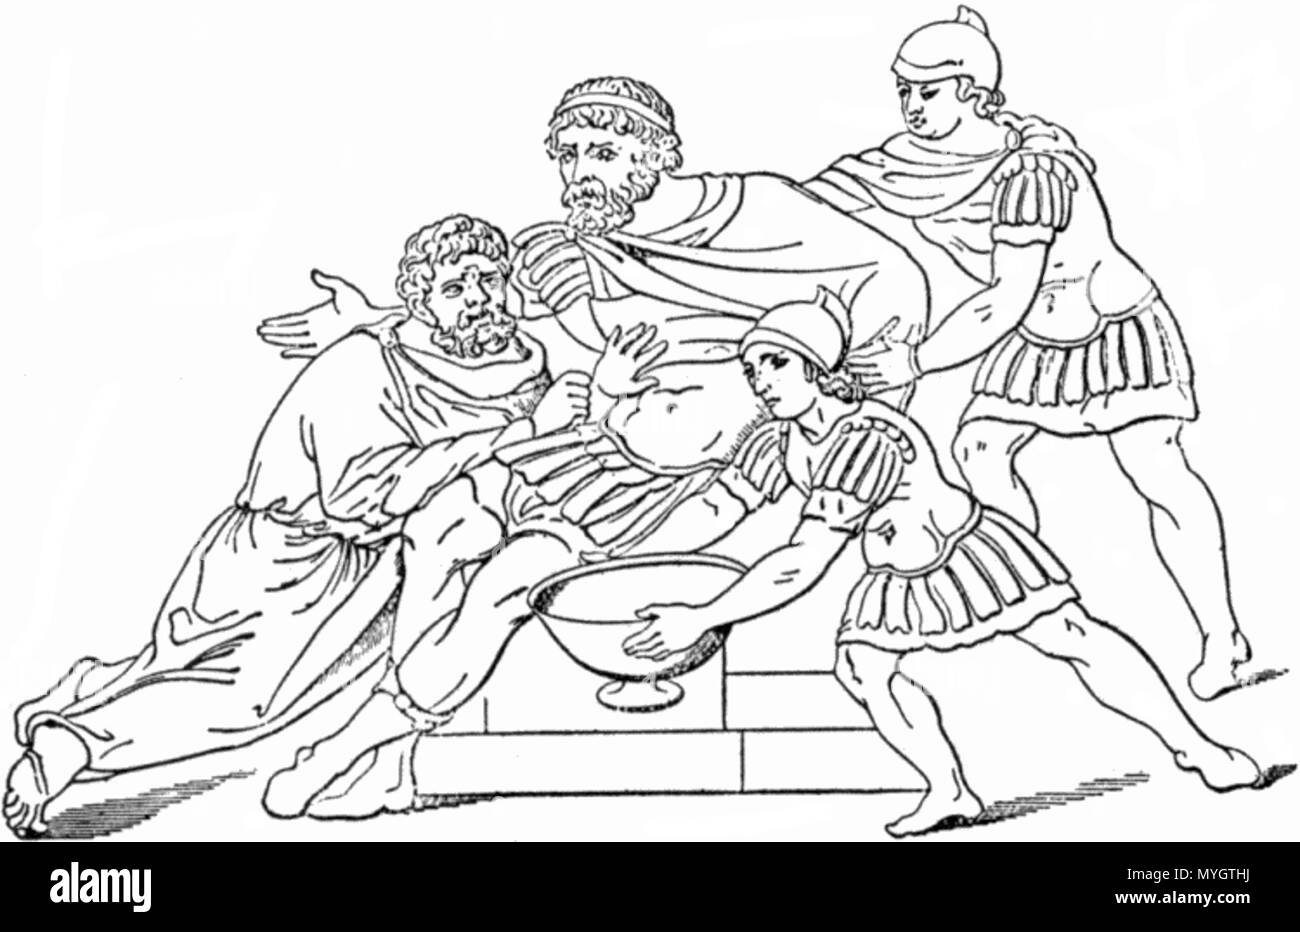 . Machaon (Son of Asklepios), The first Greek military surgeon, attending to the wounded Menelaus. 07/12/2008. Unknown 254 Illus-035 Stock Photo